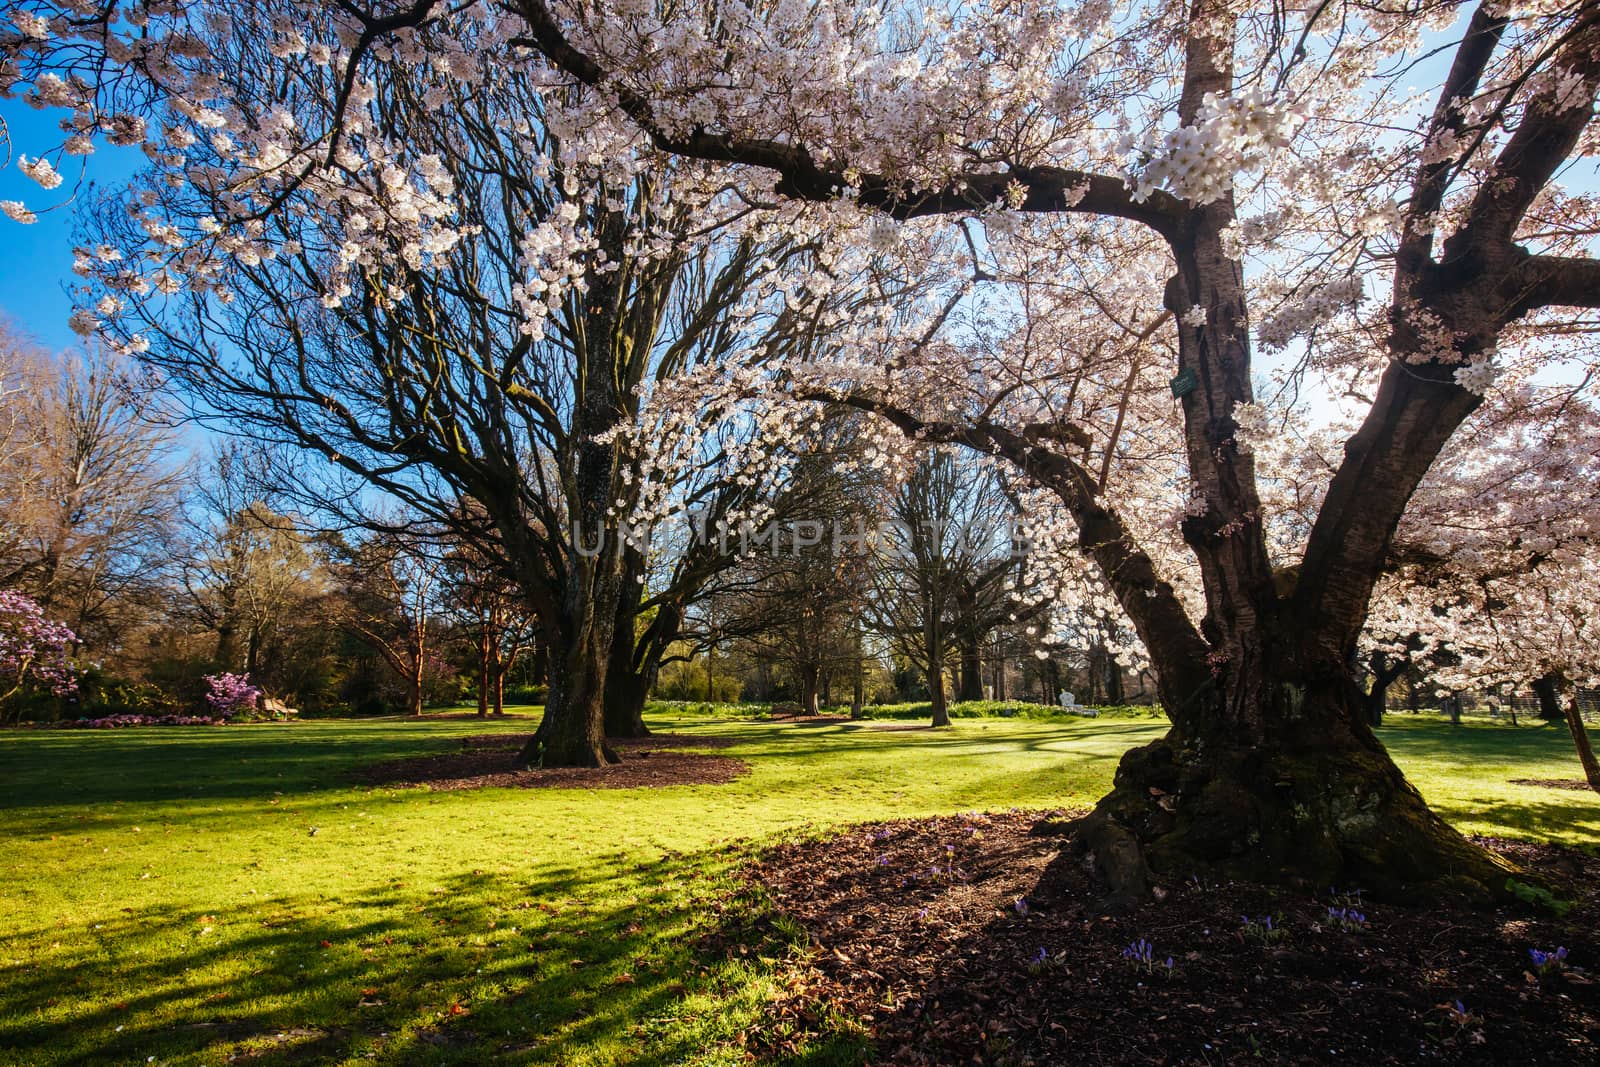 Landscape around the River Avon in Christchurch on a warm spring day in New Zealand